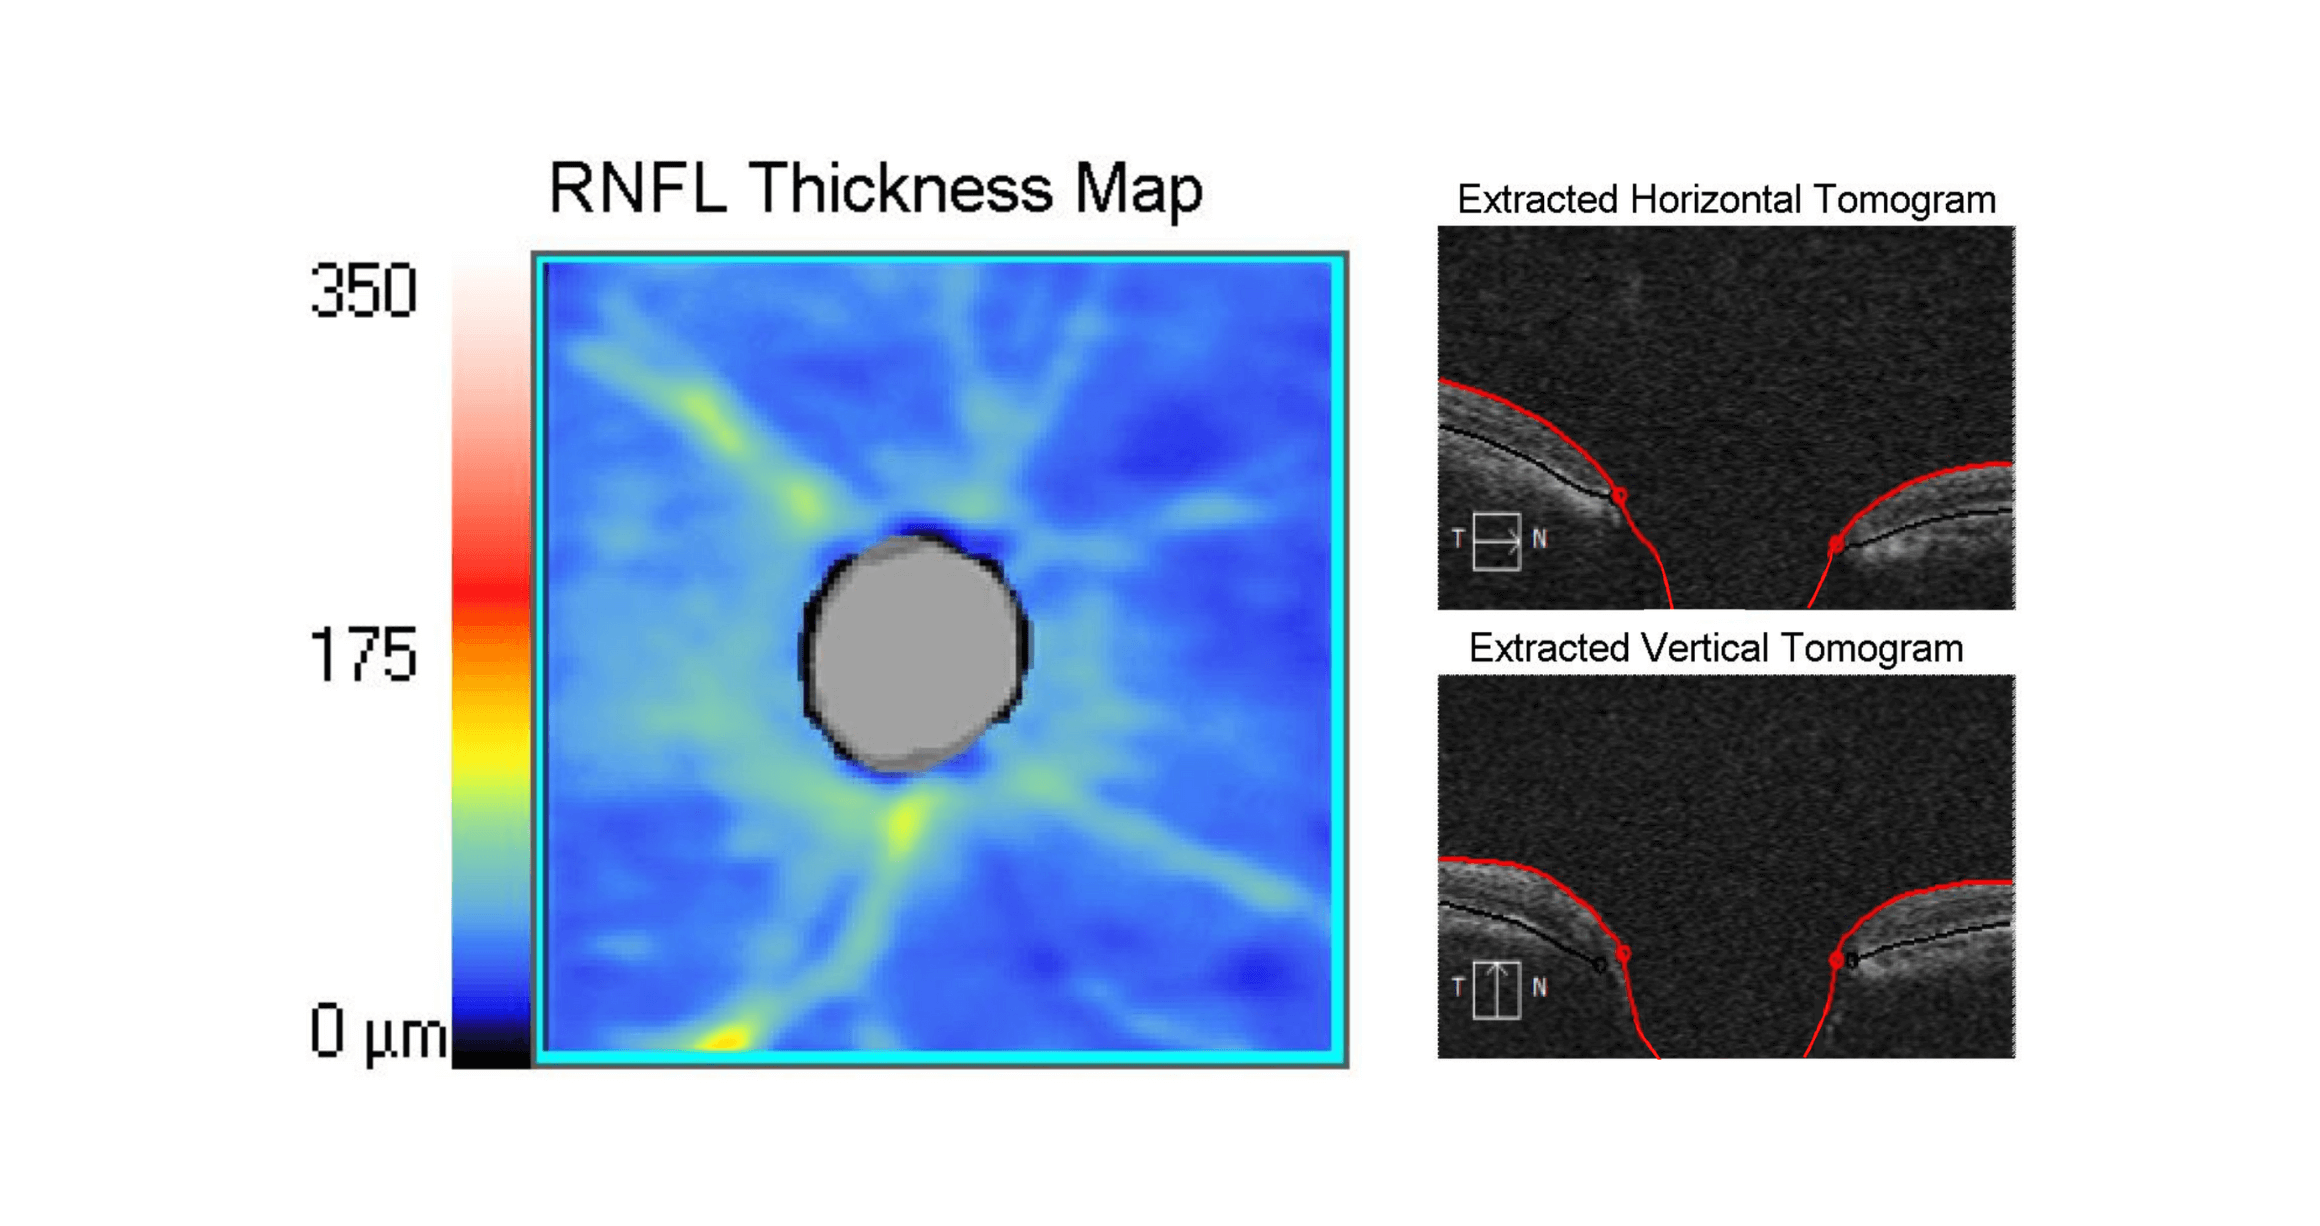 OCT scan results showing the retinal nerve fibre layer of an eye with advanced glaucoma